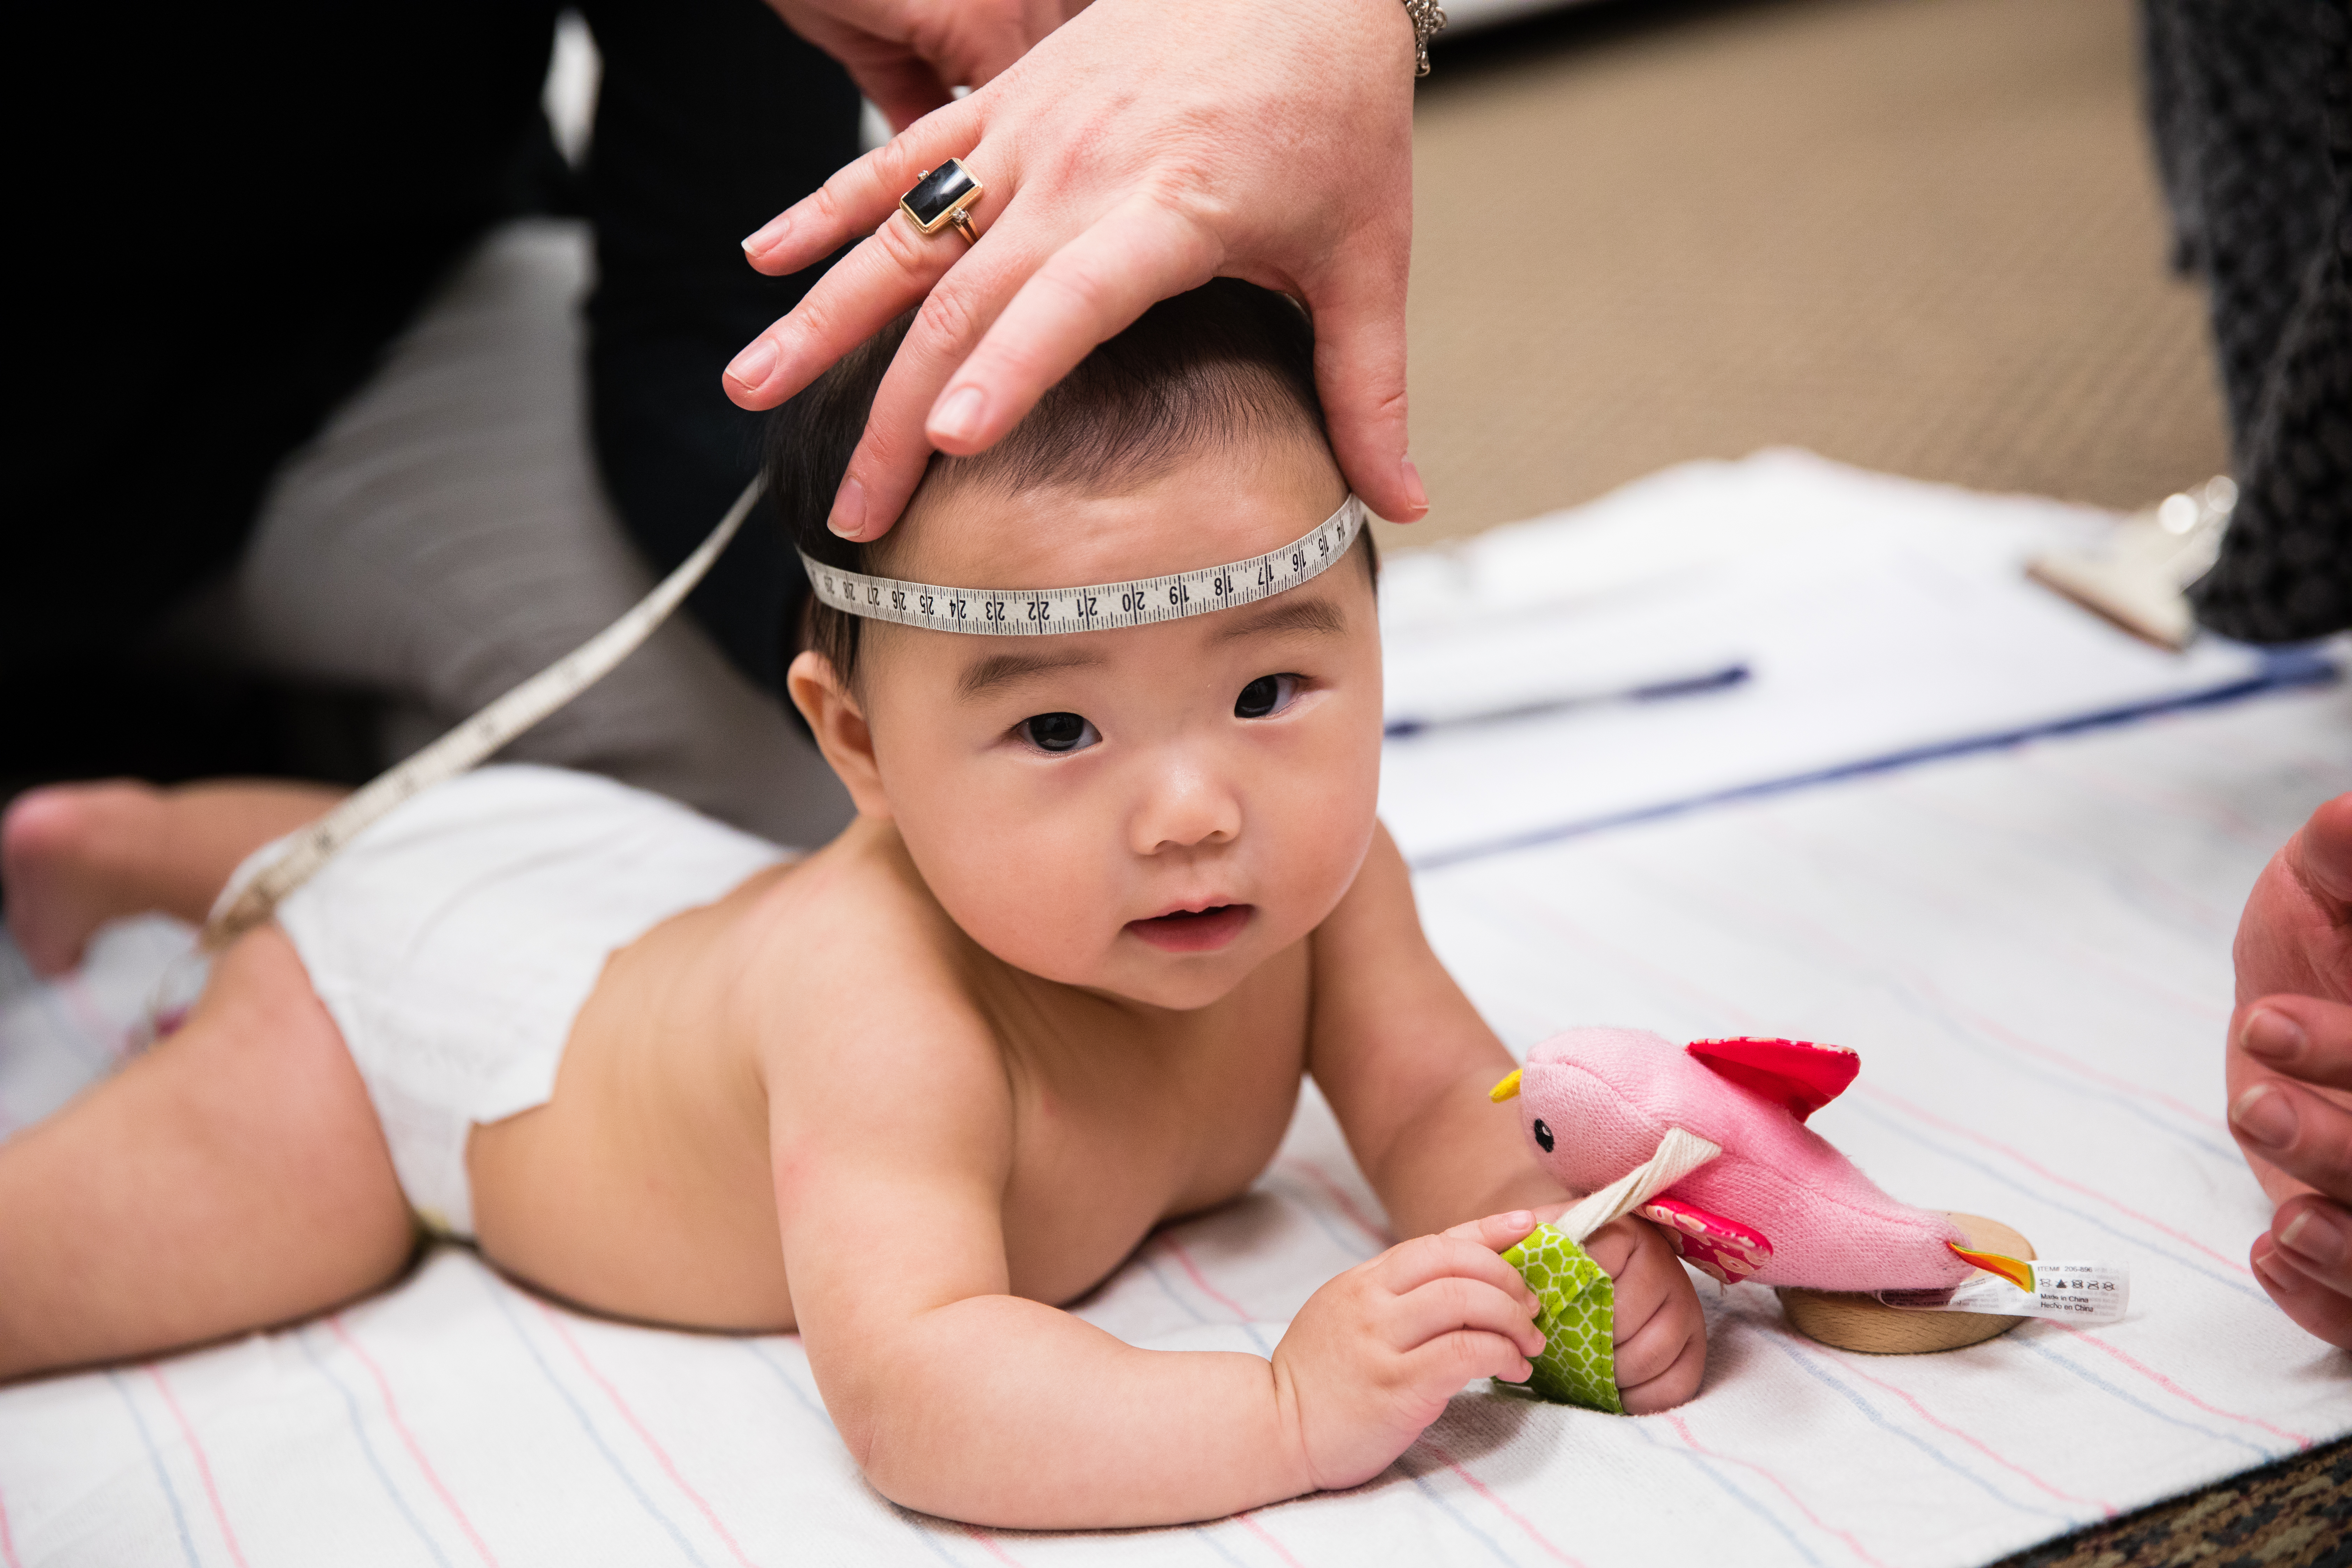 Infant looking at camera while head circumference is measured with a flexible measuring tape